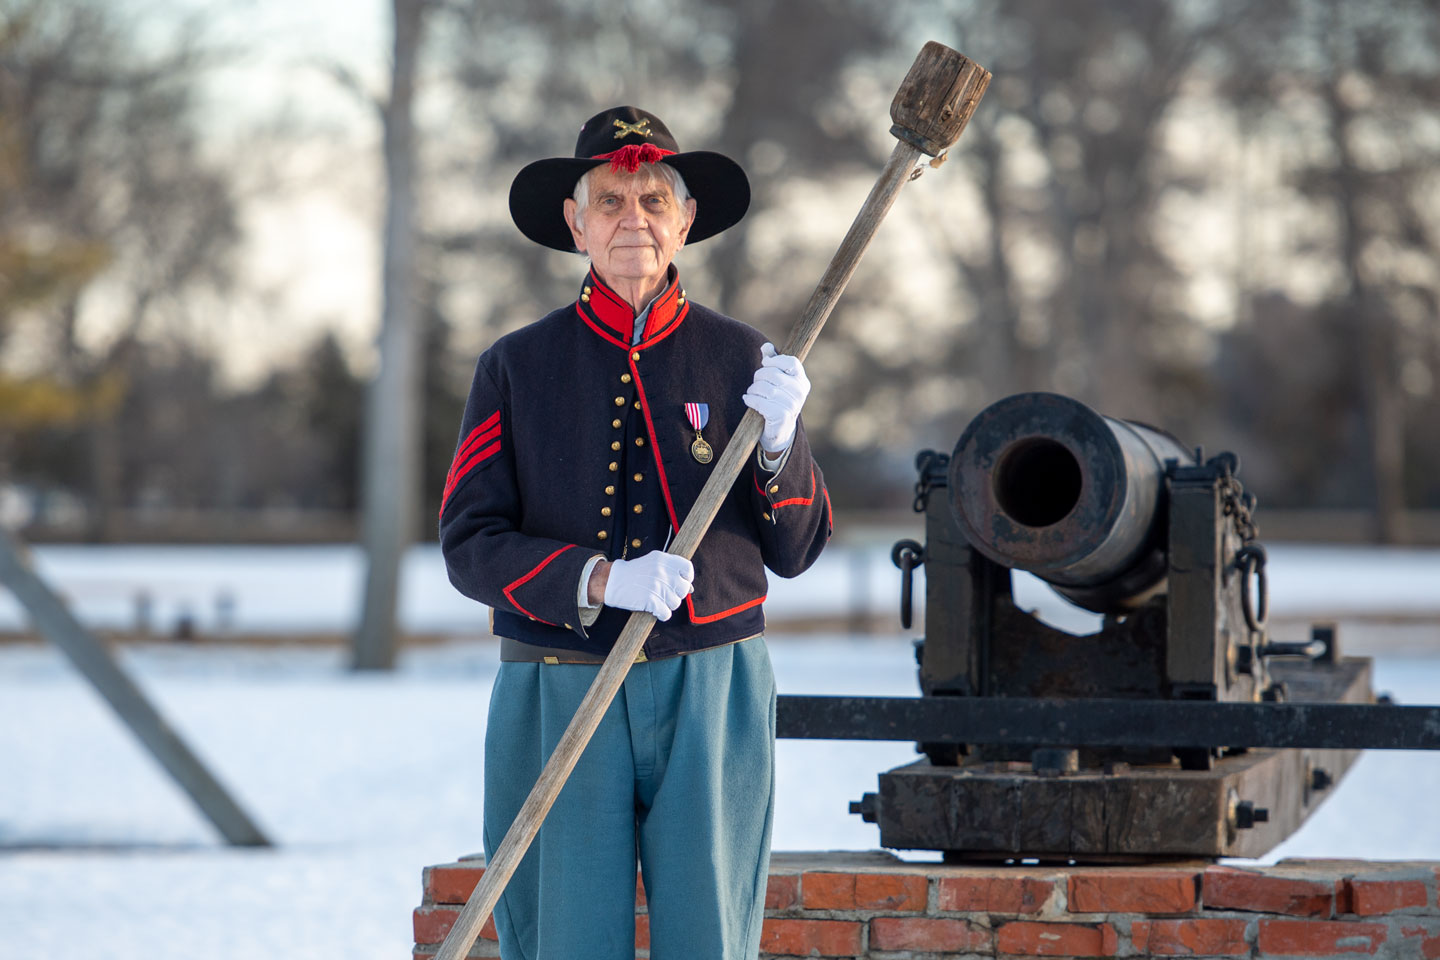 Fort Kearny to host living history event